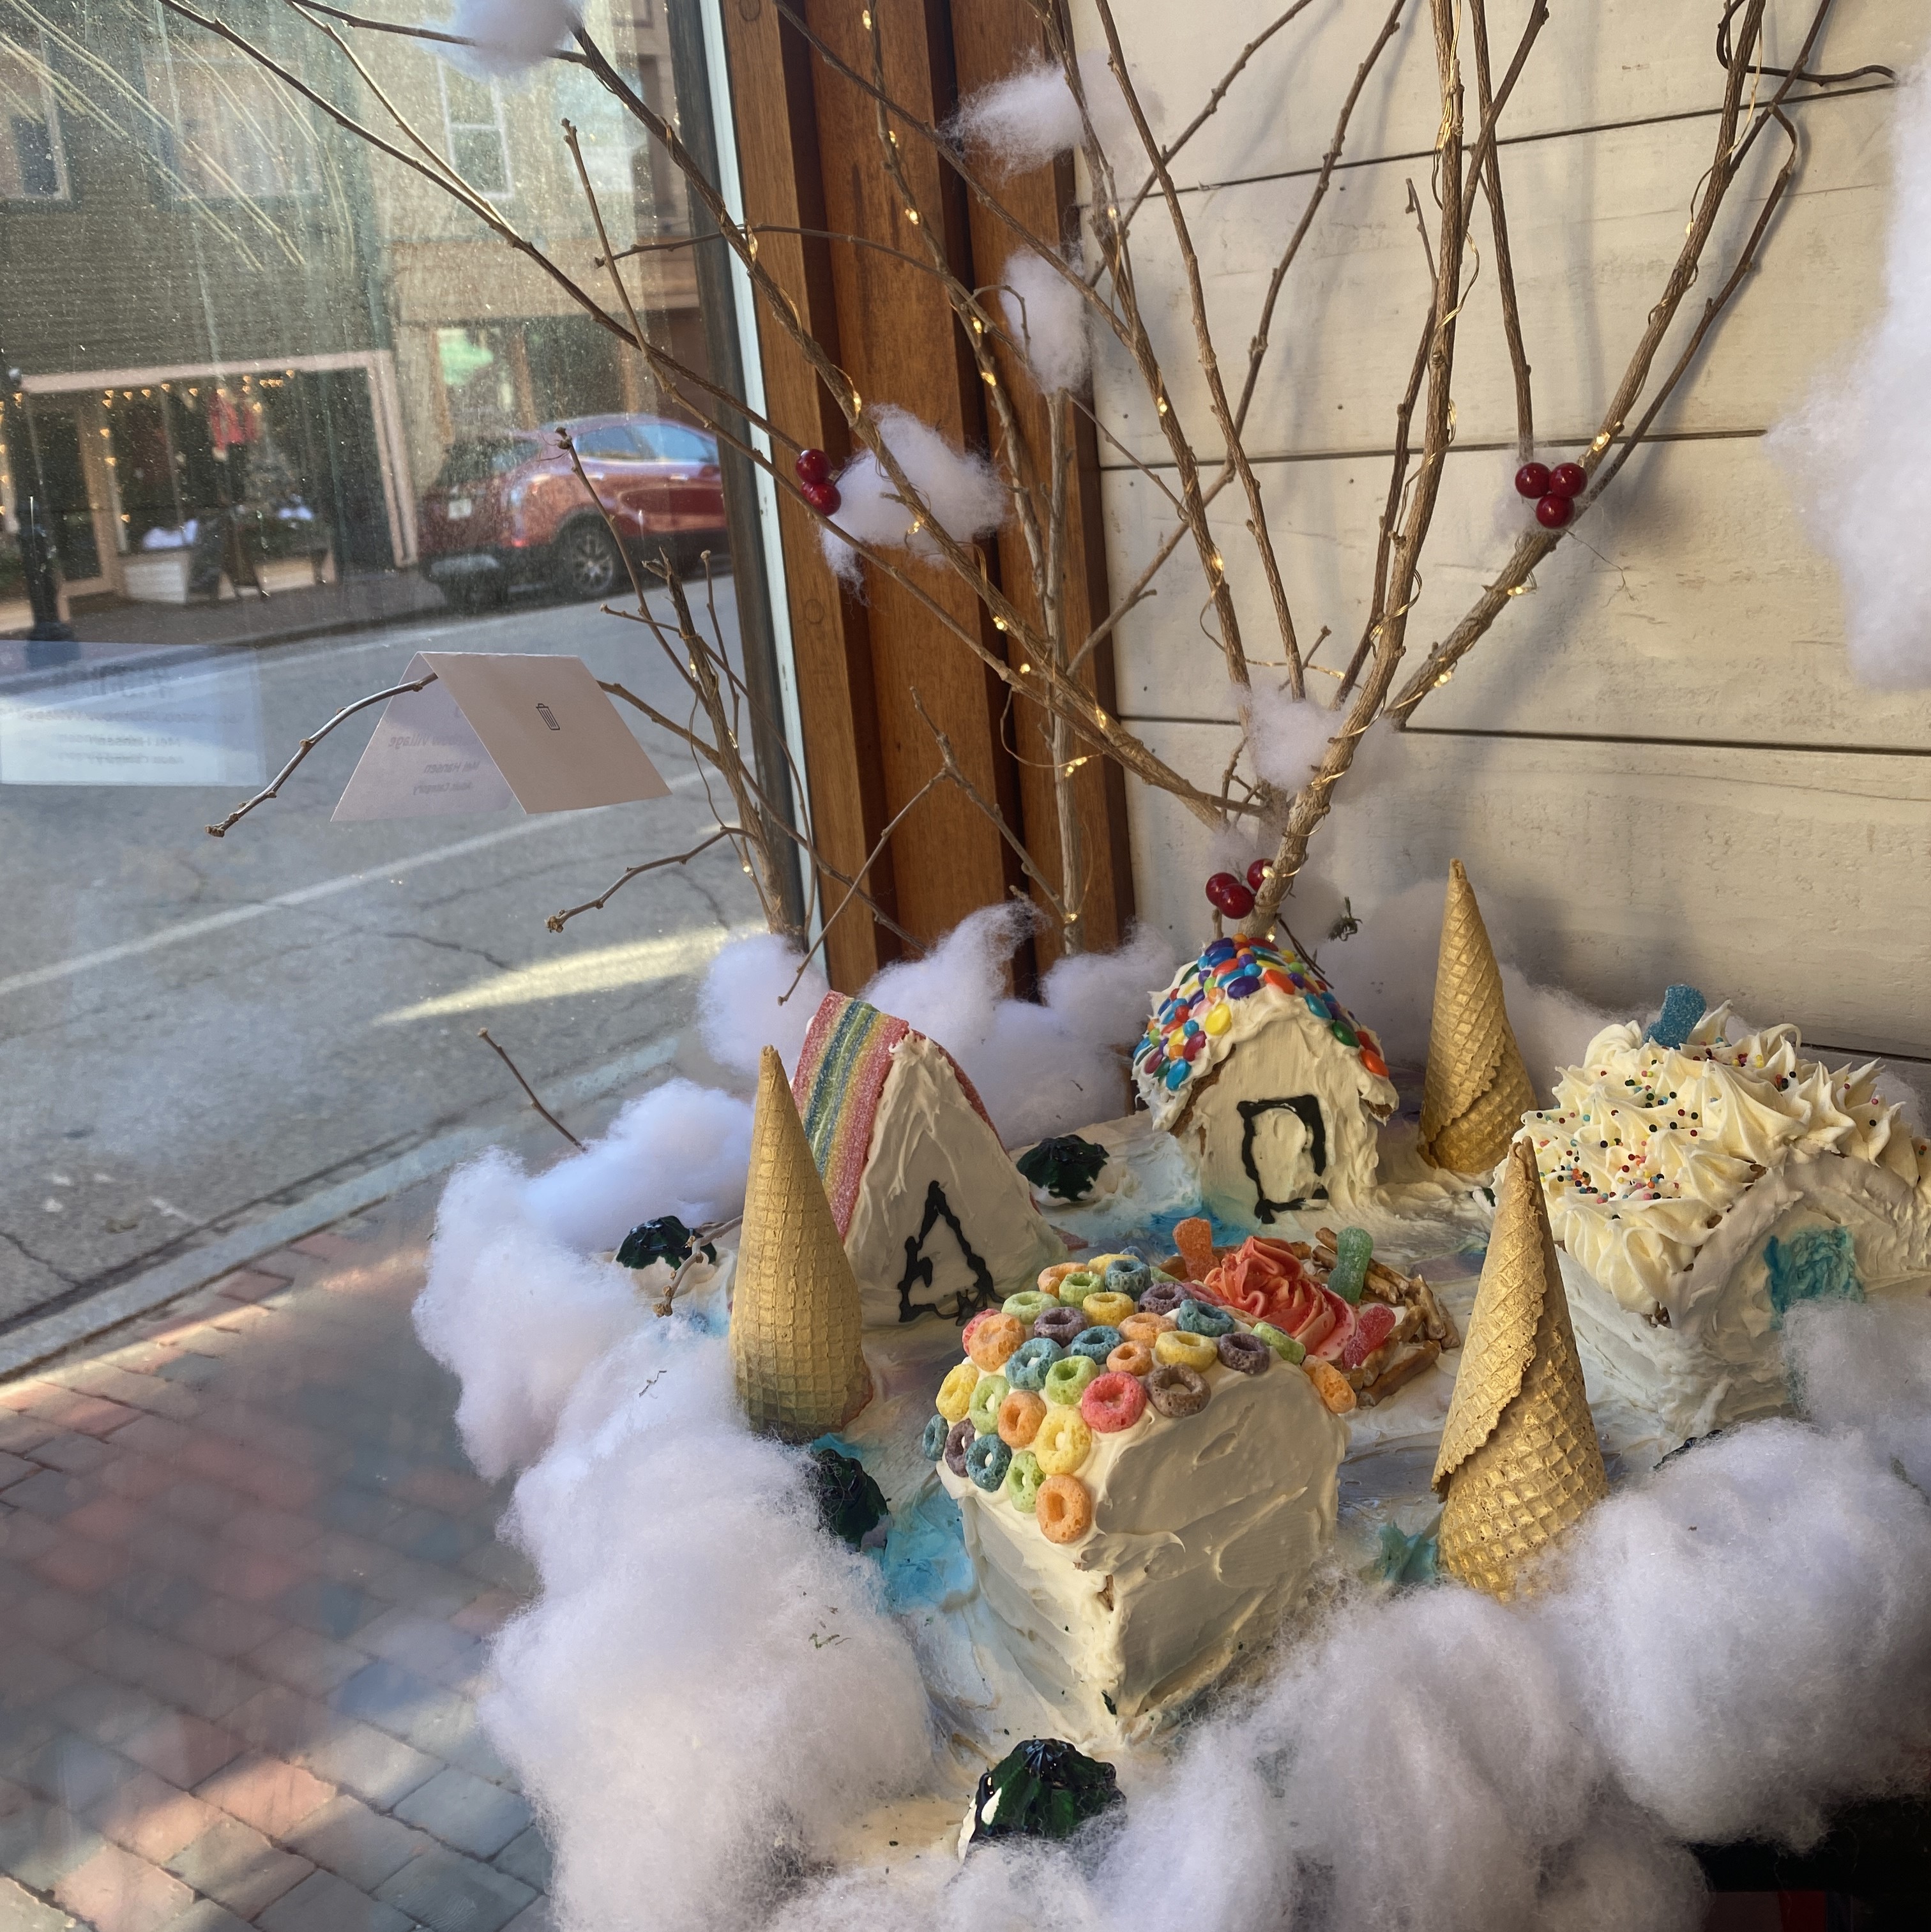 A gingerbread house in a storefront window